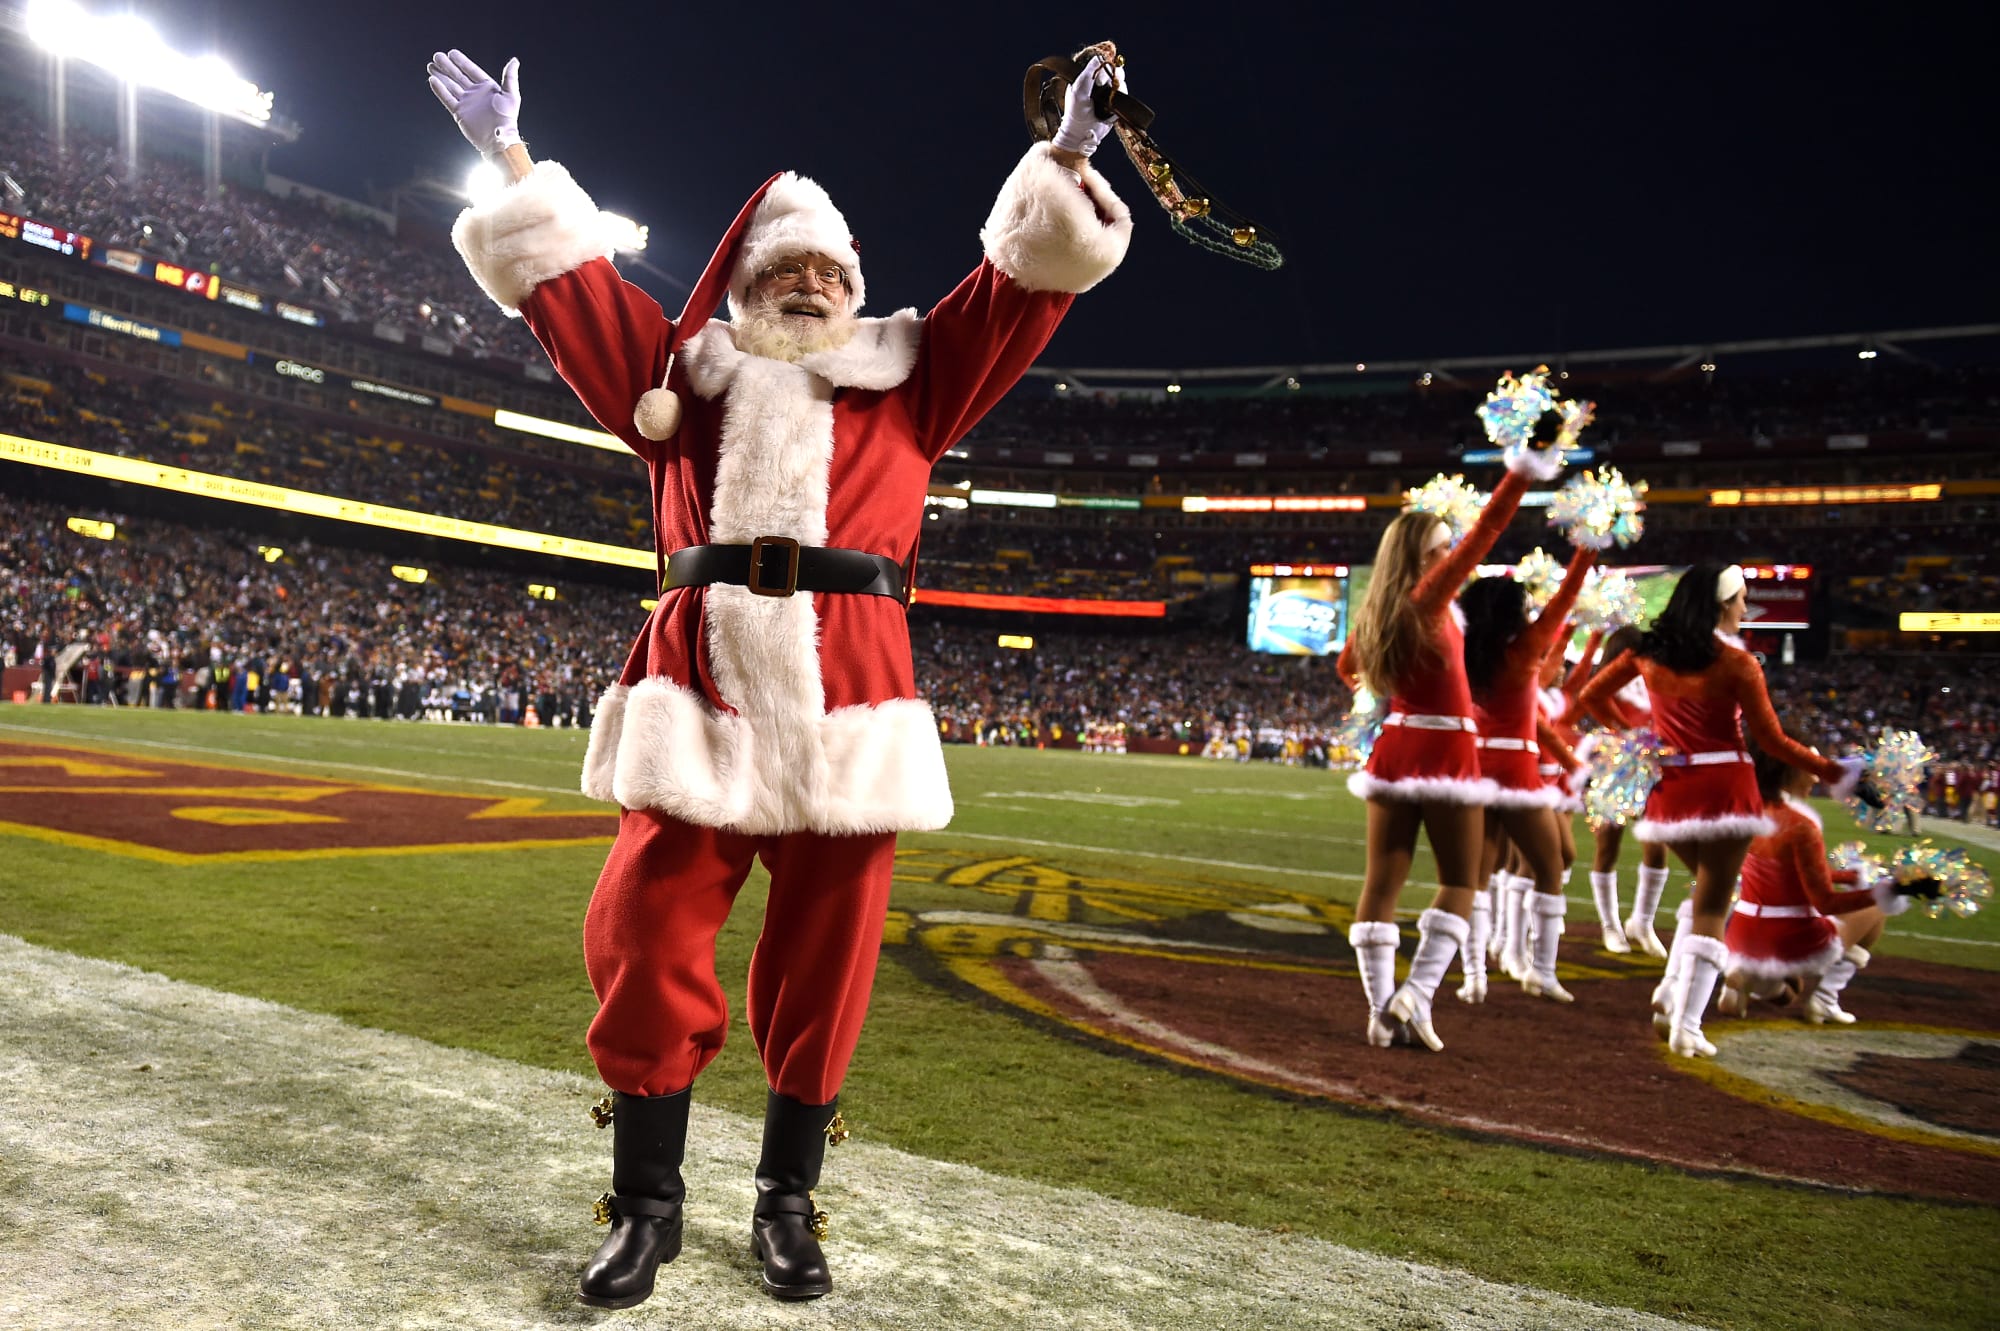 49ers fans Merry Christmas from your friends at Niner Noise!